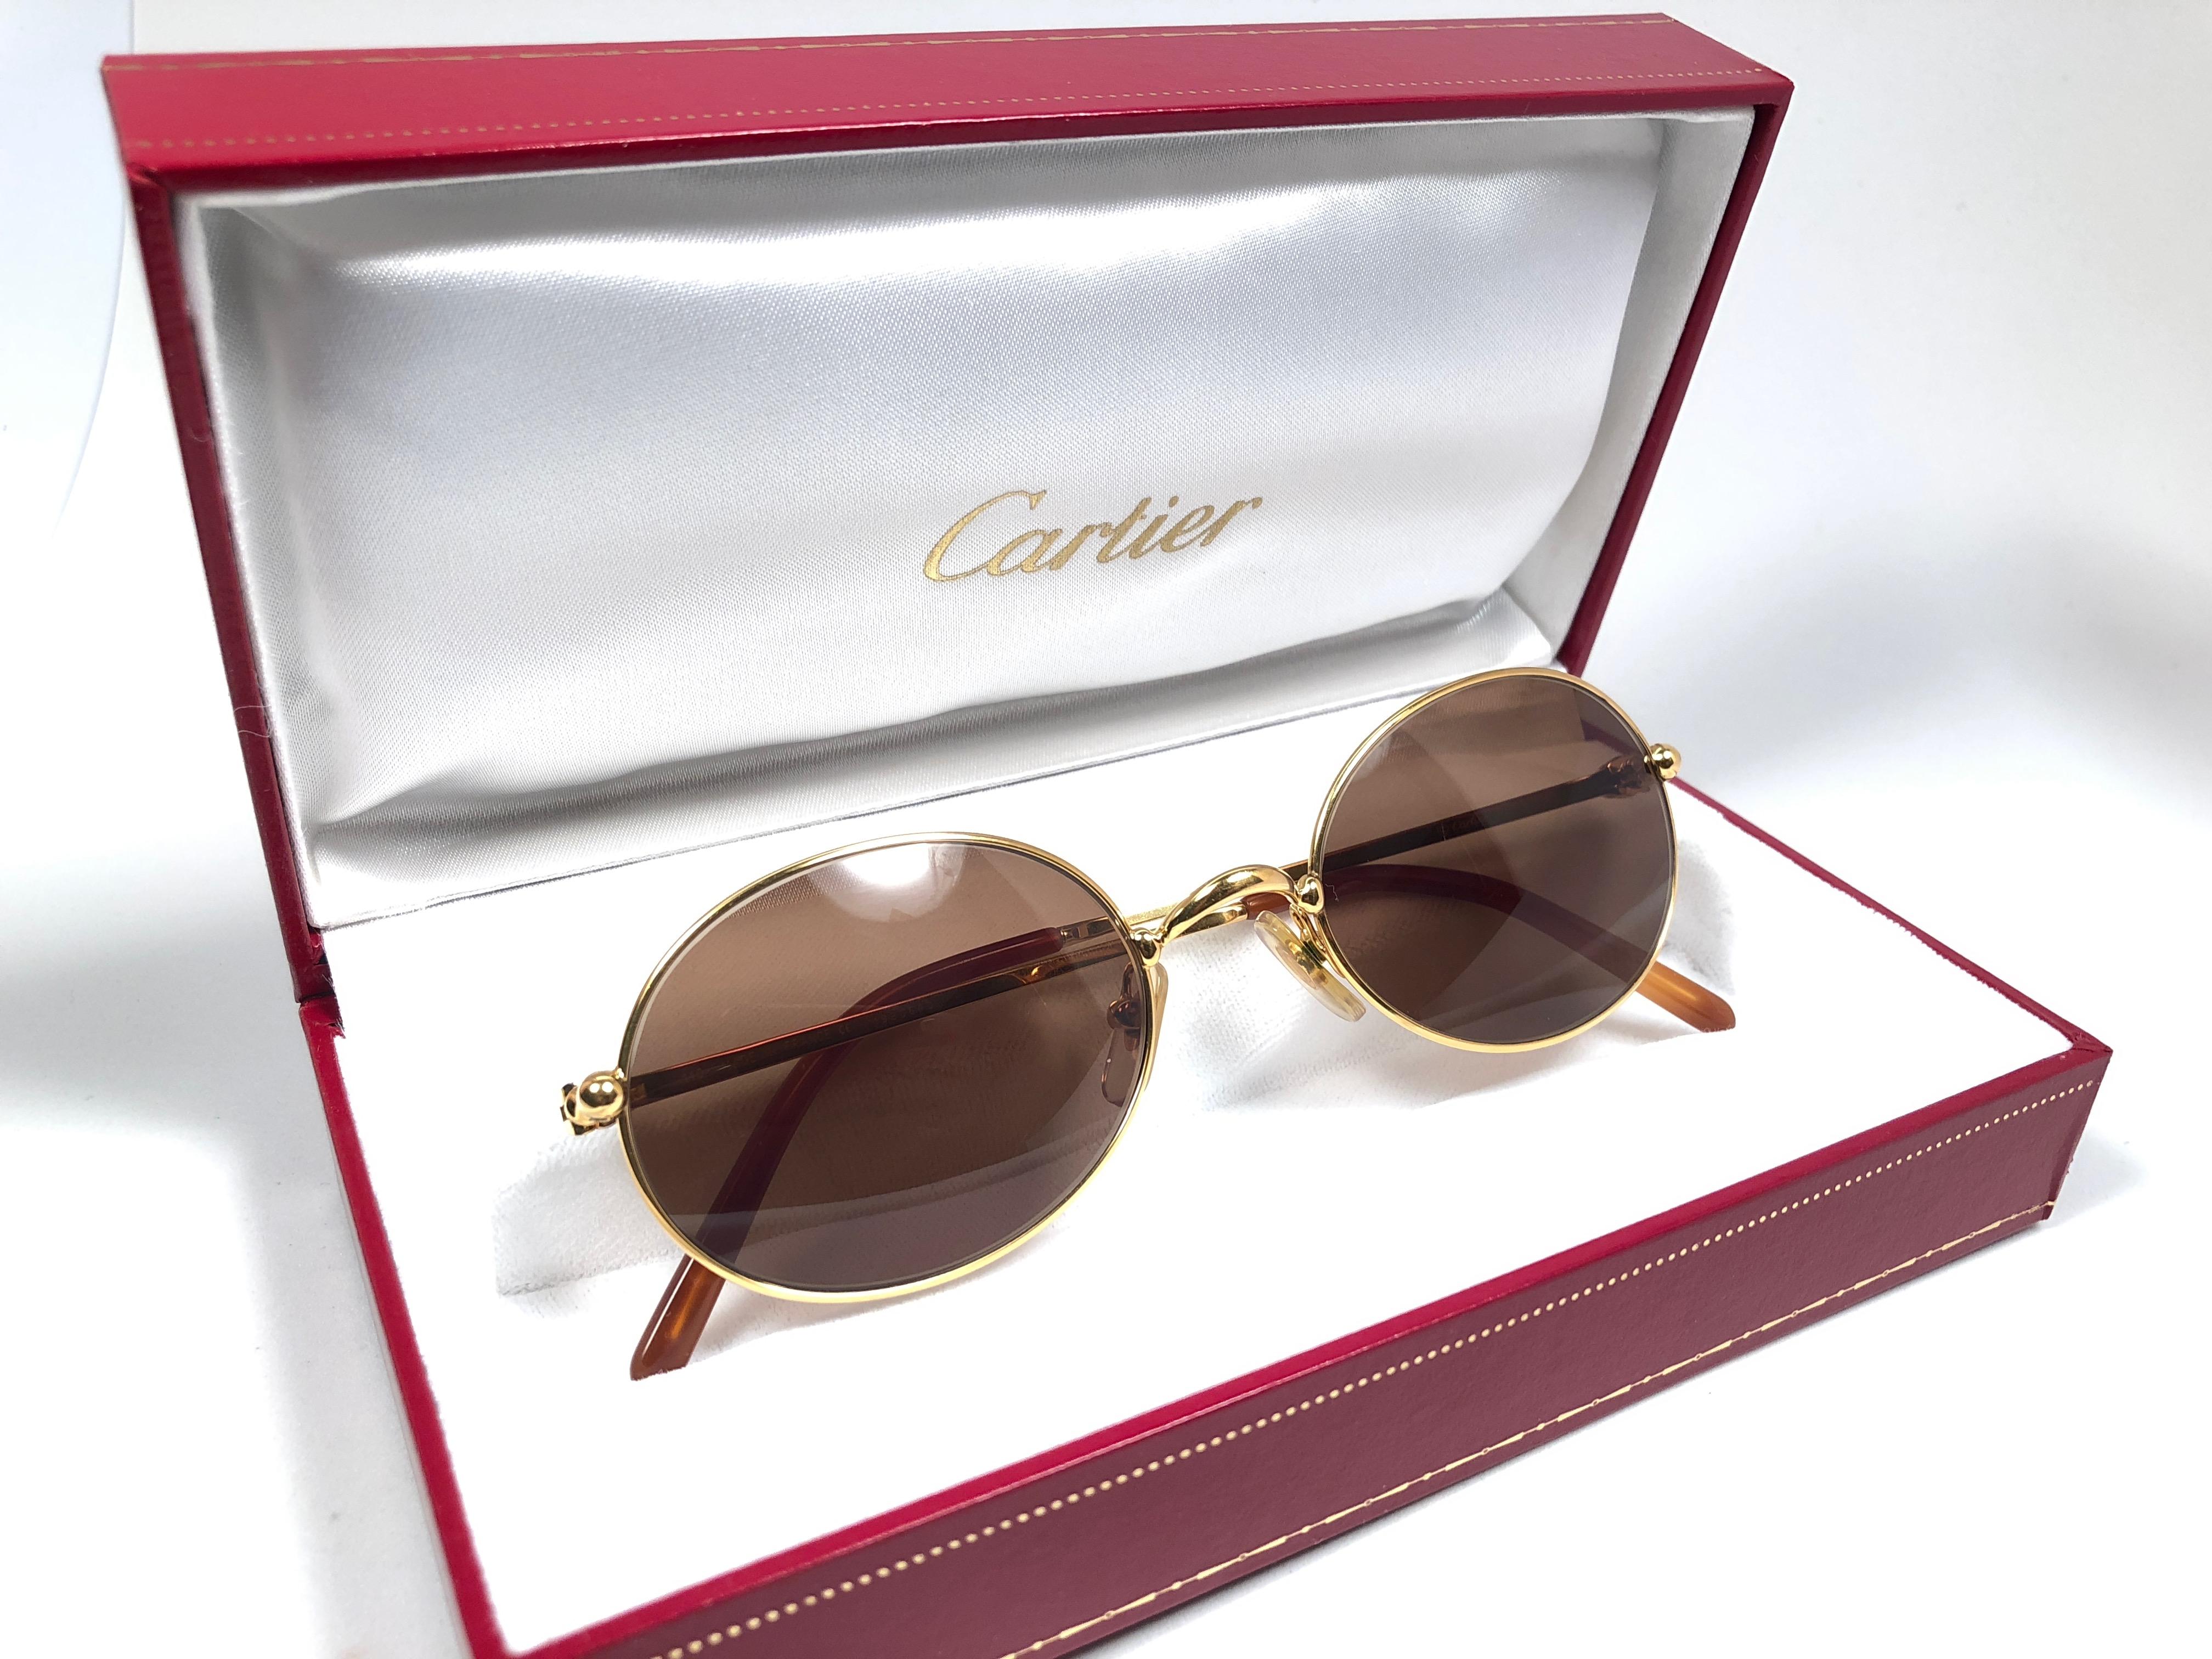 New 1990 Cartier Saturne Sunglasses with brown (uv protection) lenses.  All hallmarks.  Cartier gold signs on the ear paddles.  
These are like a pair of jewels on your nose. Please notice this pair is nearly 30 years old and may have minor sign of